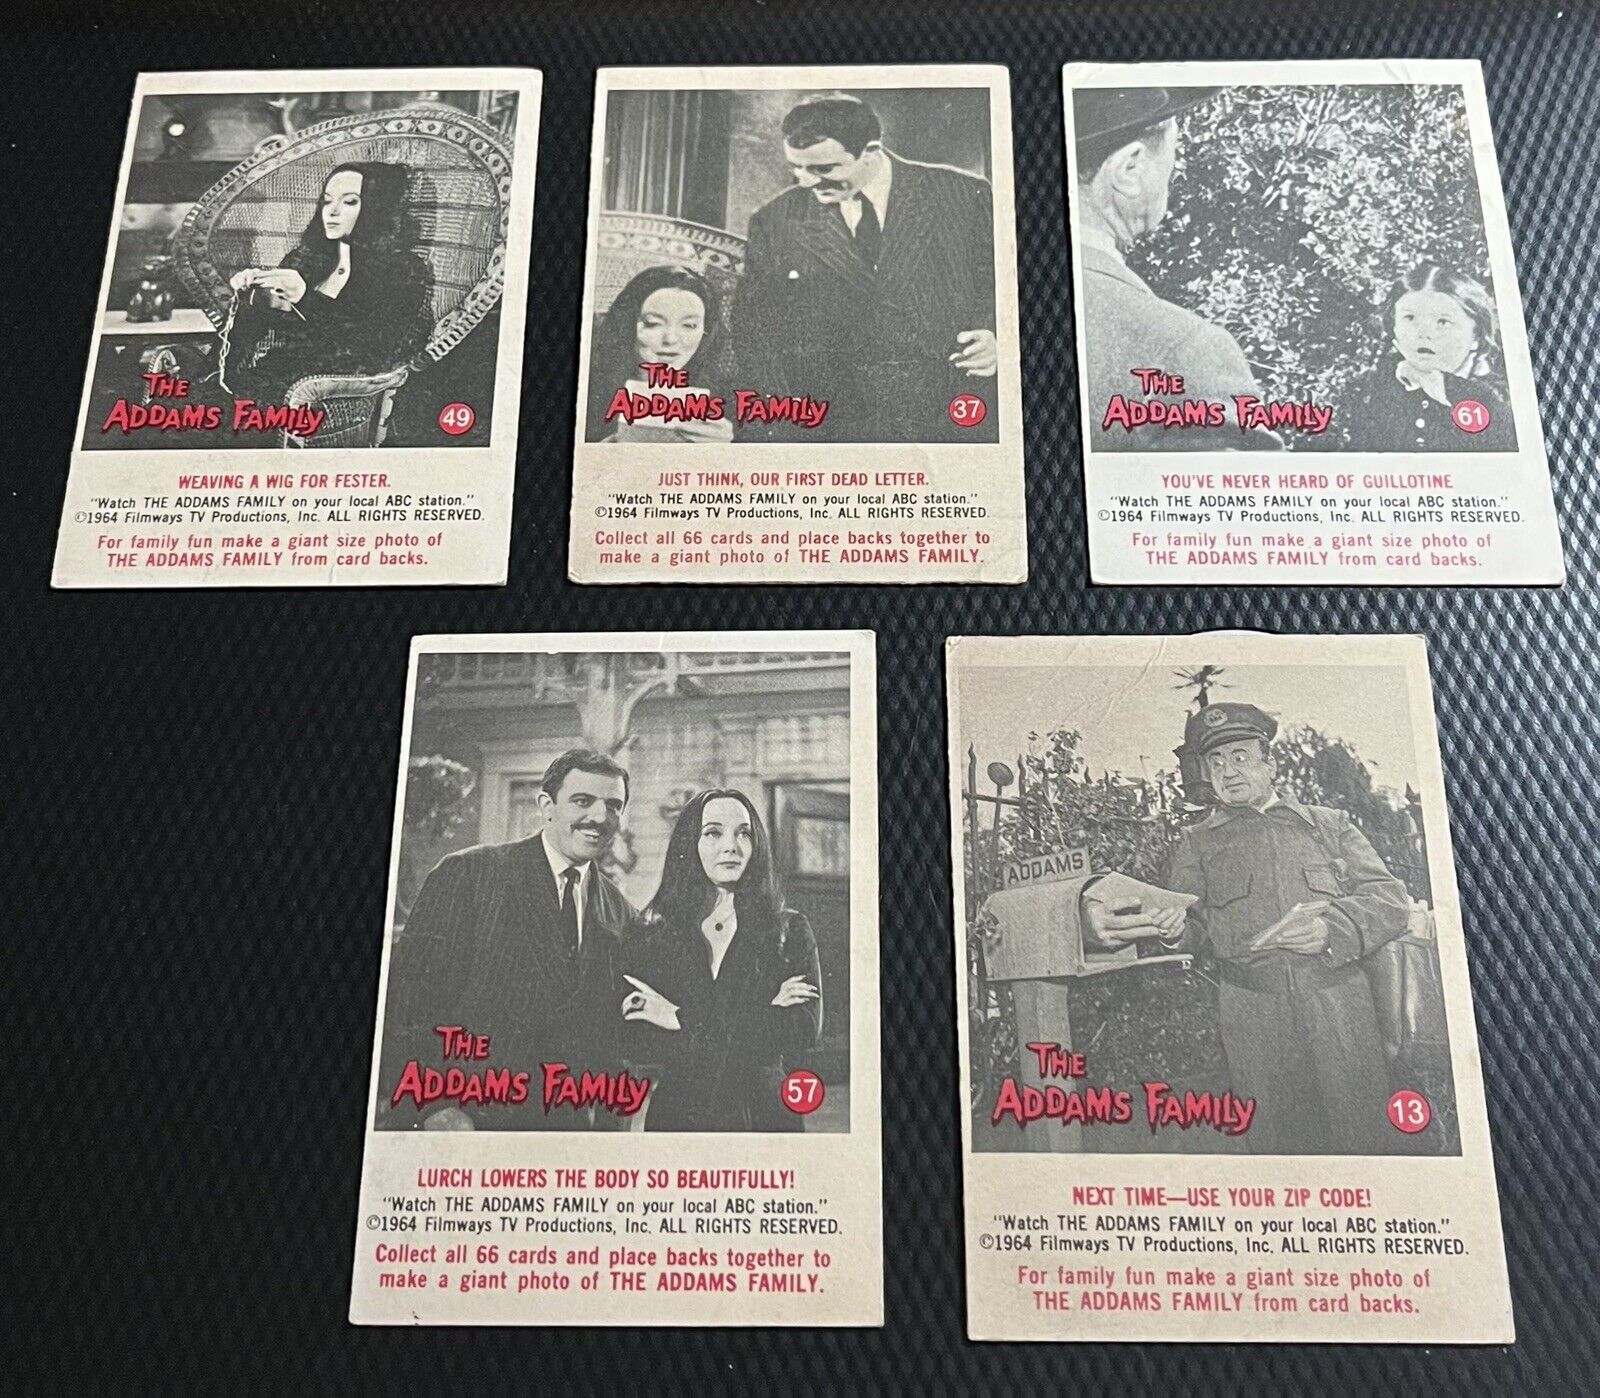 1964 Filmways Addams Family 5-Card Low-Condition Lot - Cards Have Creases